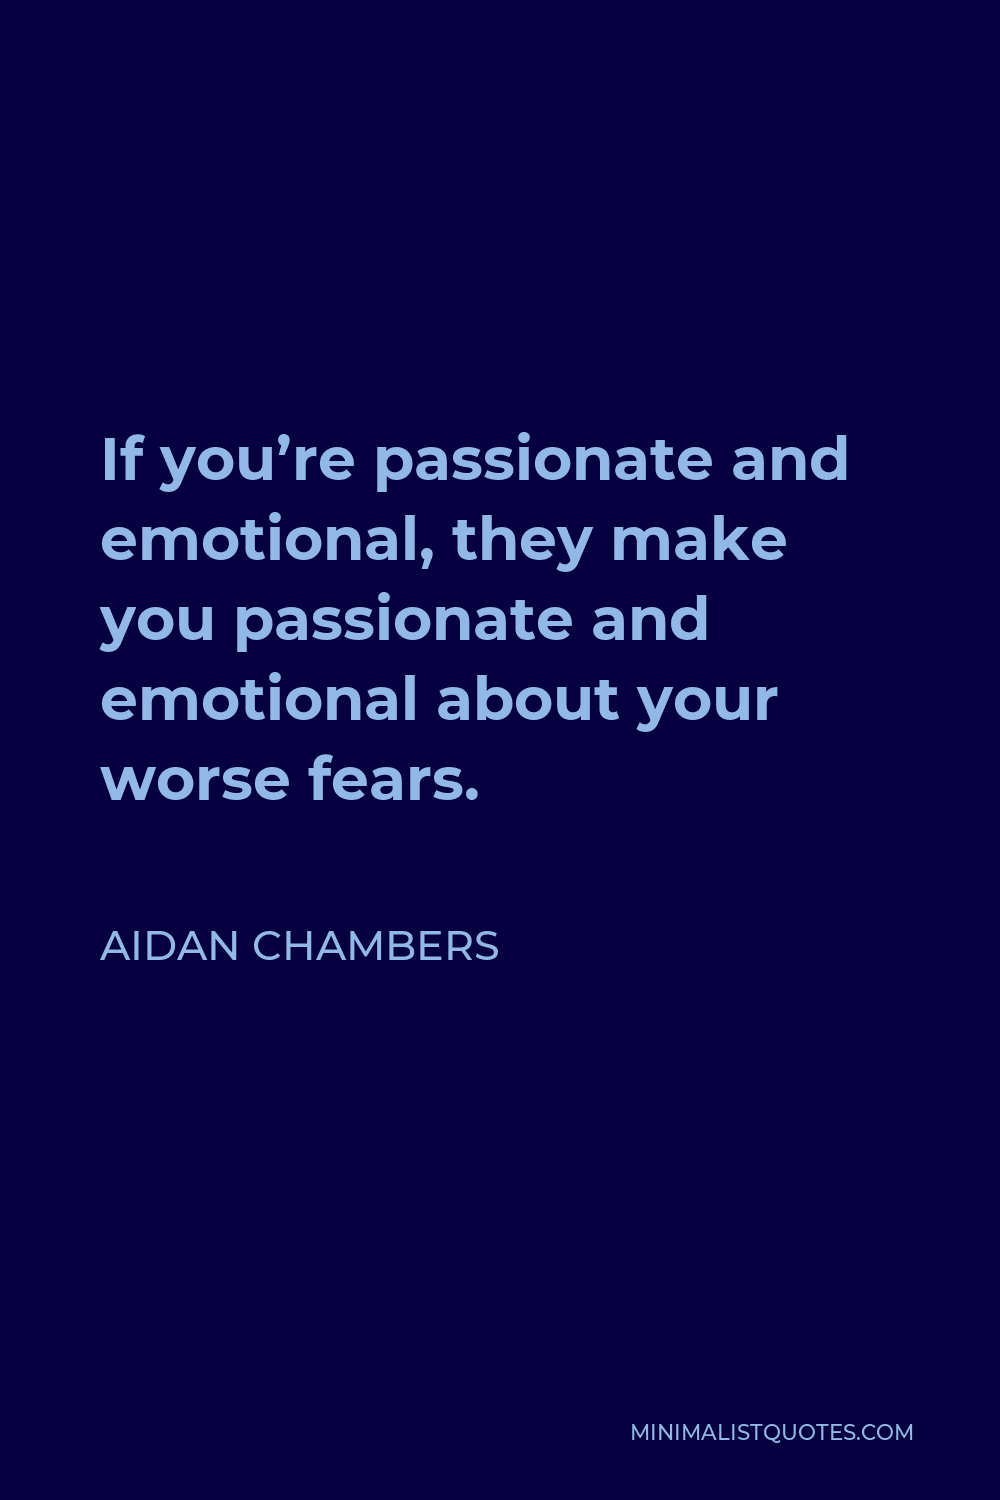 Aidan Chambers Quote - If you’re passionate and emotional, they make you passionate and emotional about your worse fears.